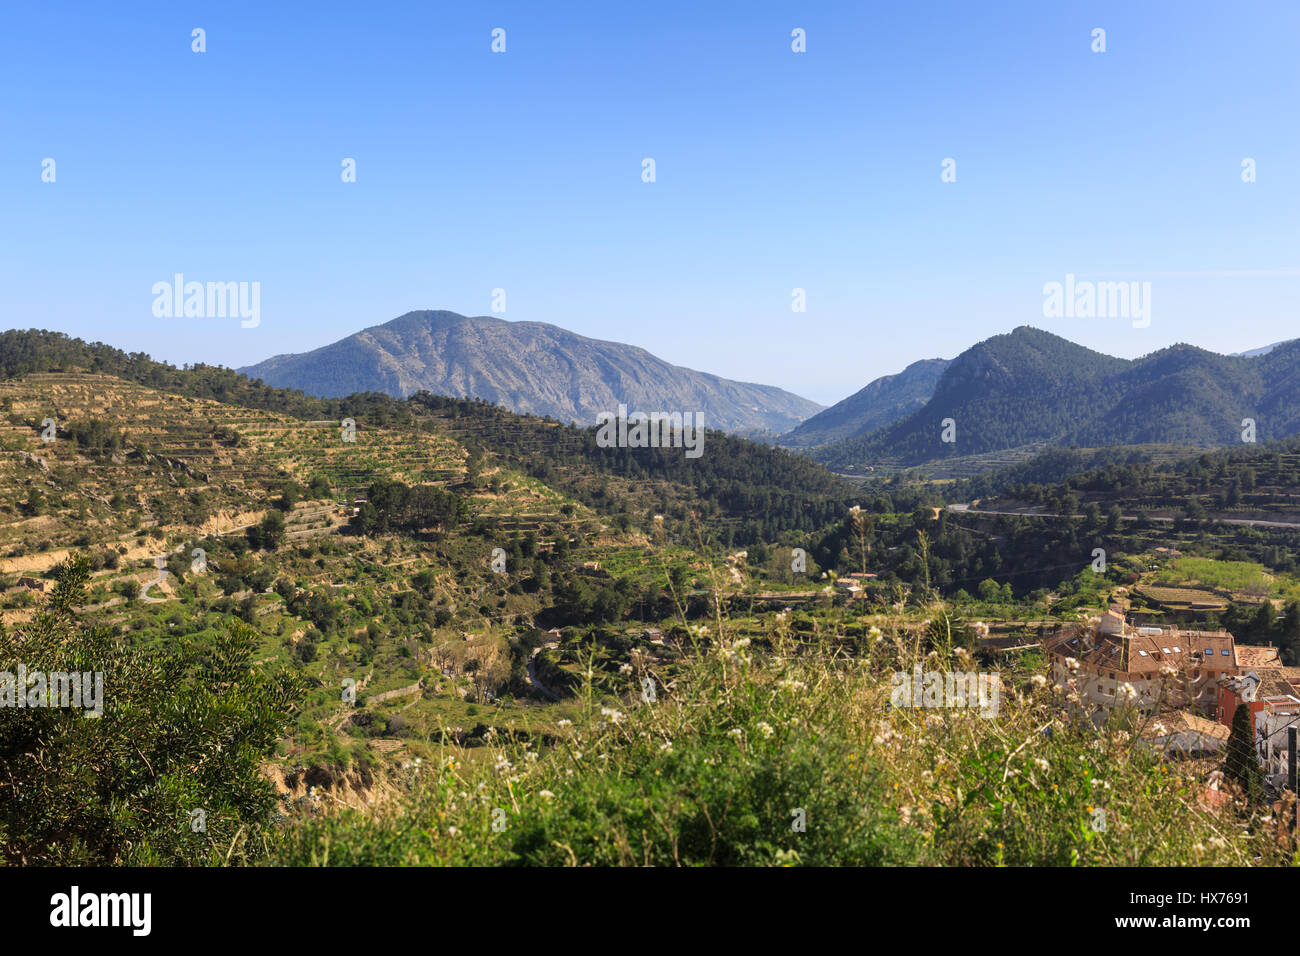 Panoramic mountain and country side views, Sella, Valencia Region, Spain Stock Photo